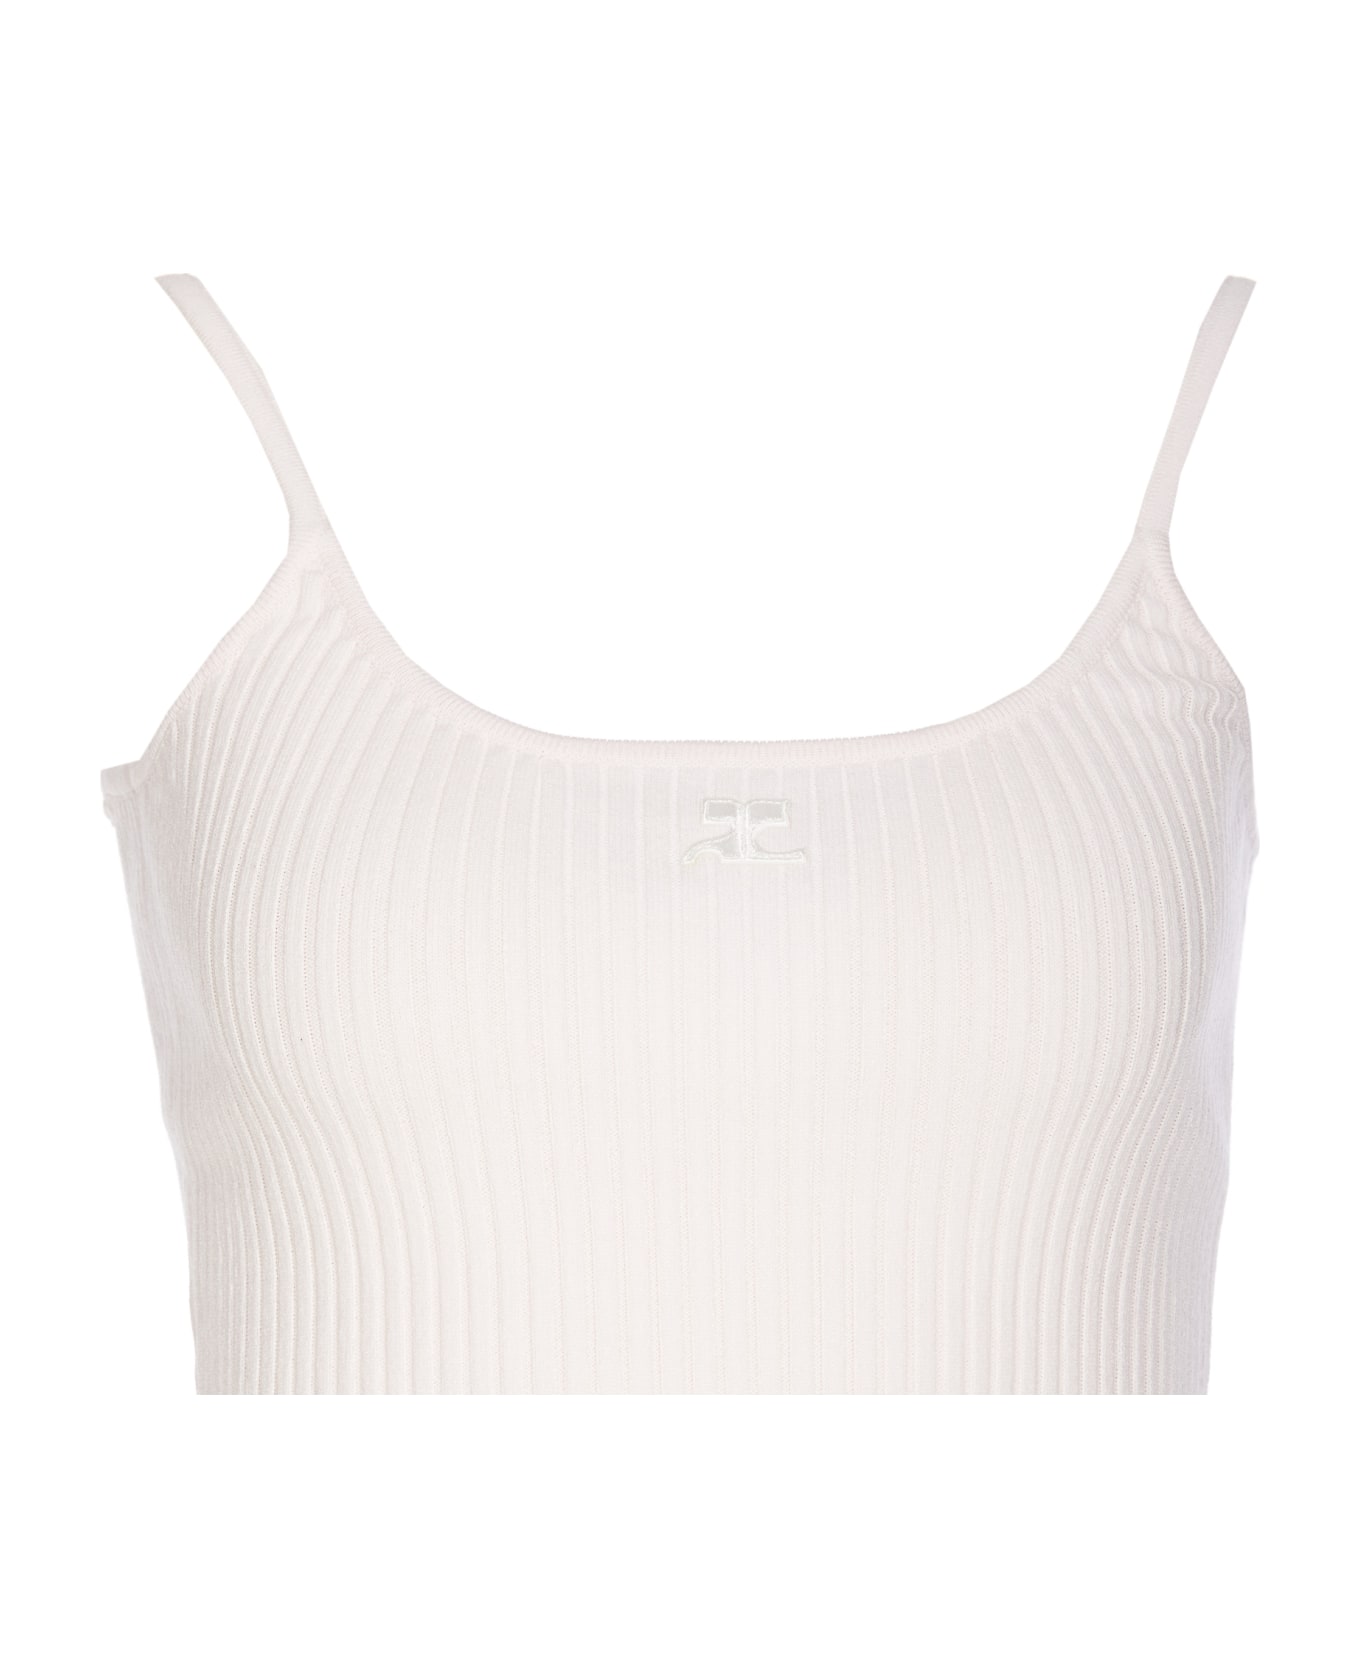 Courrèges Reedition Knit Tank Top - White